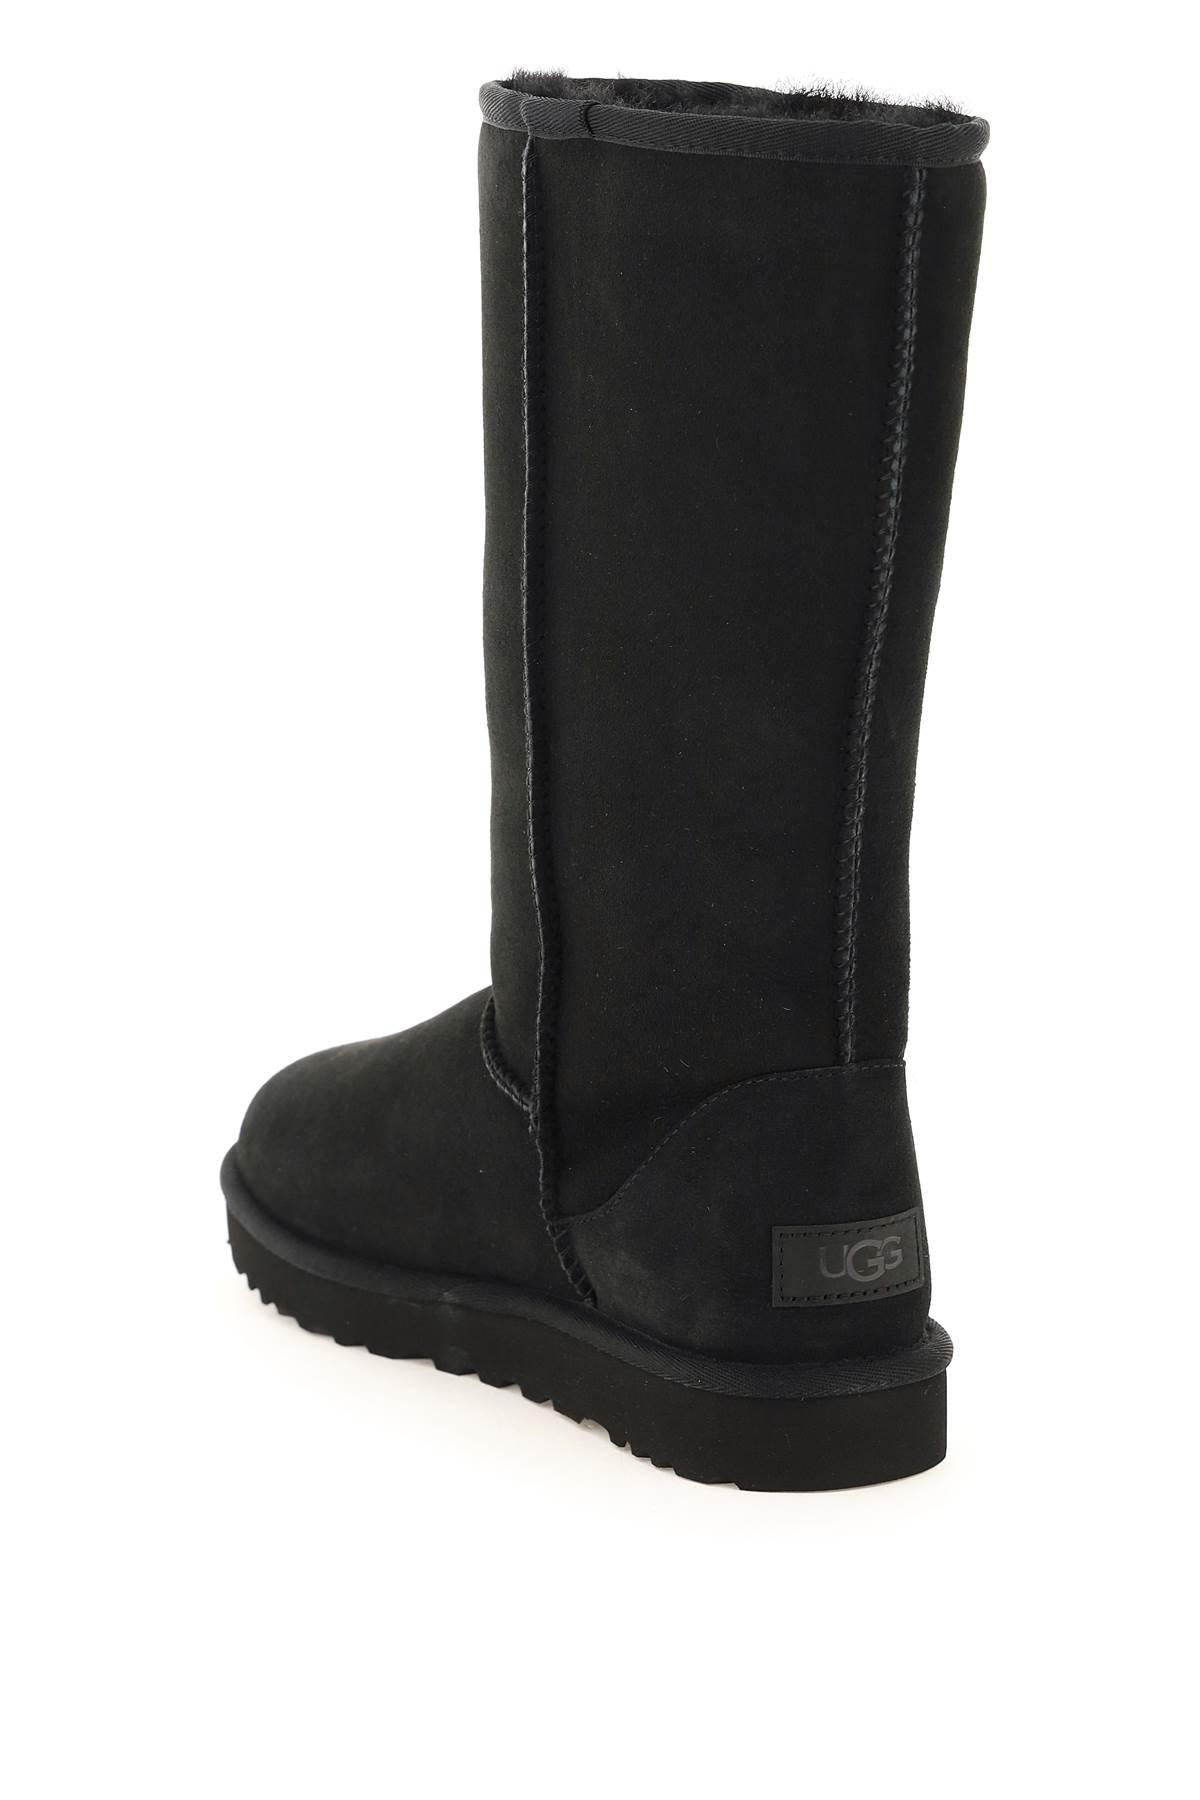 UGG Suede Classic Tall Ii Boots in Black - Save 28% | Lyst